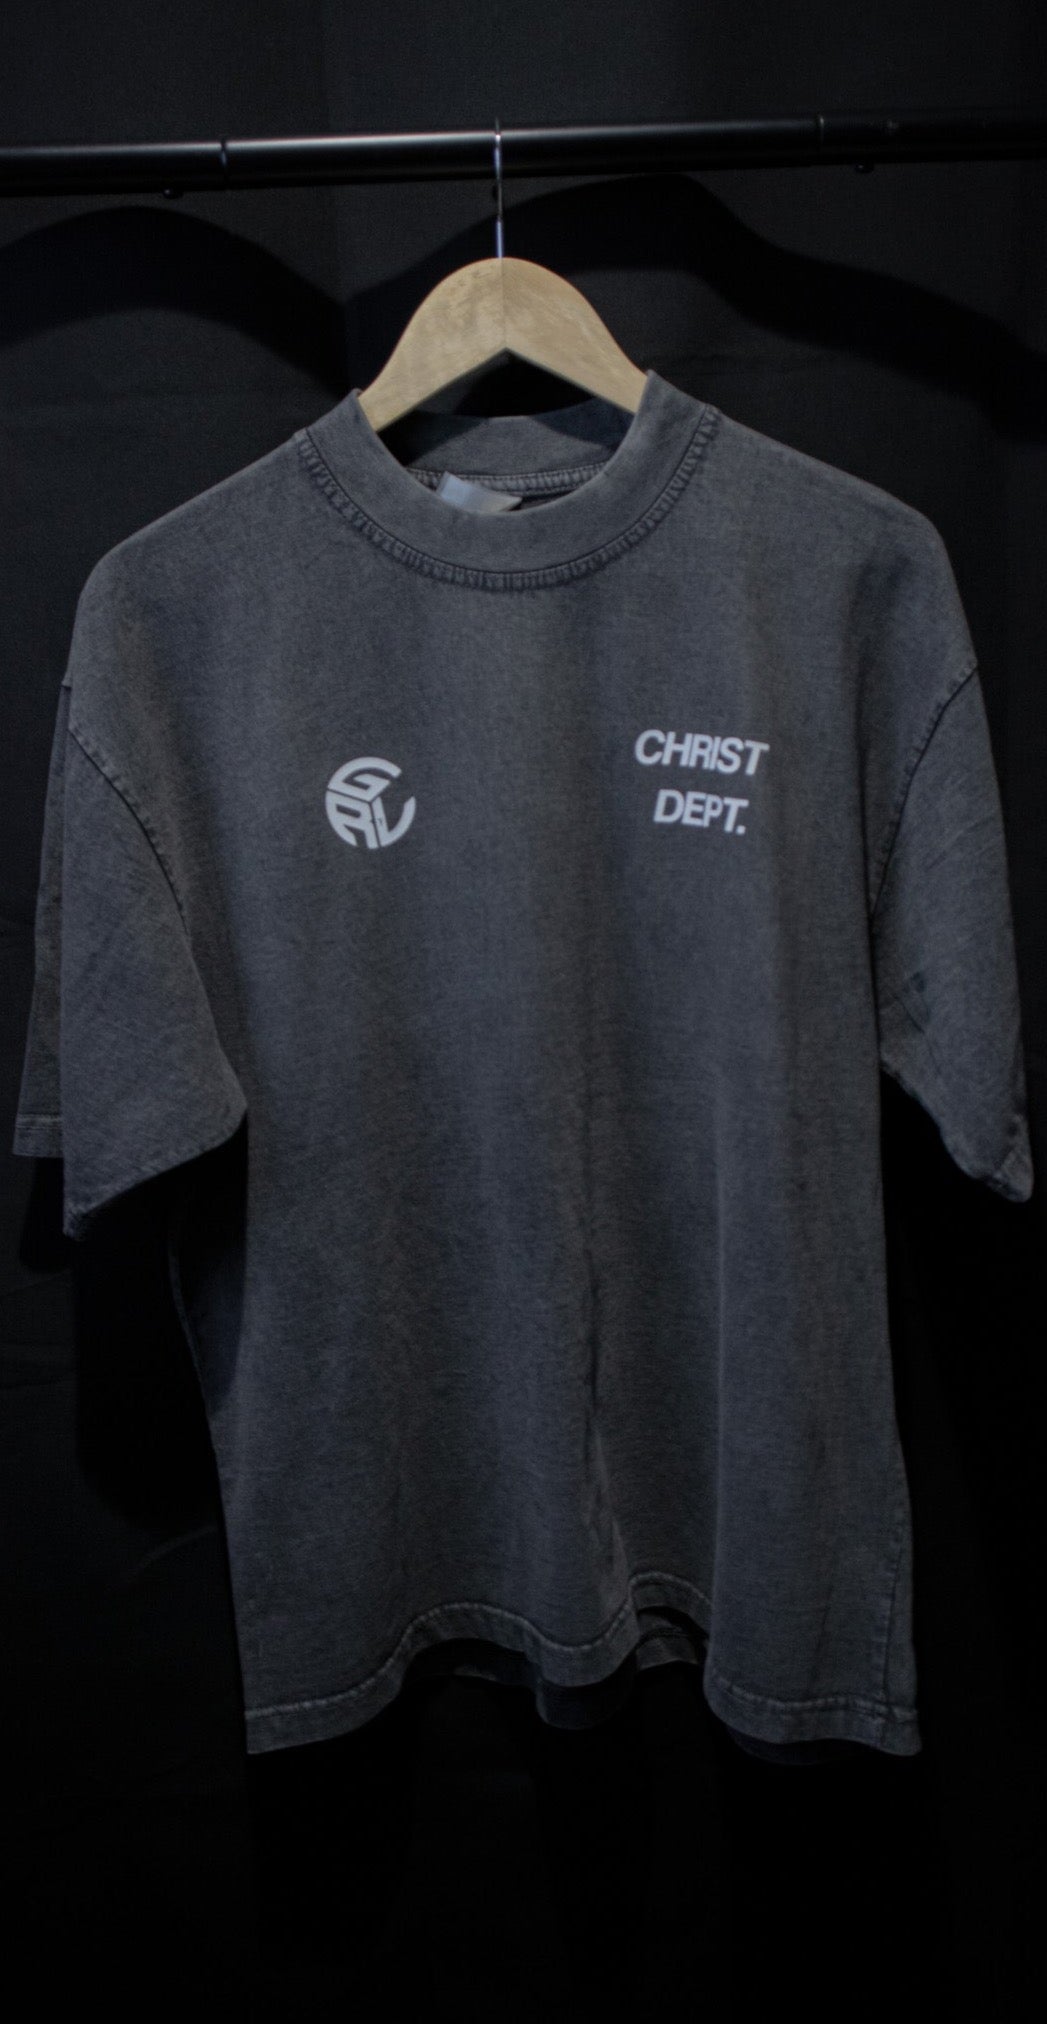 GET RIPPED LIFE® DEPARTMENT OF CHRIST TEE